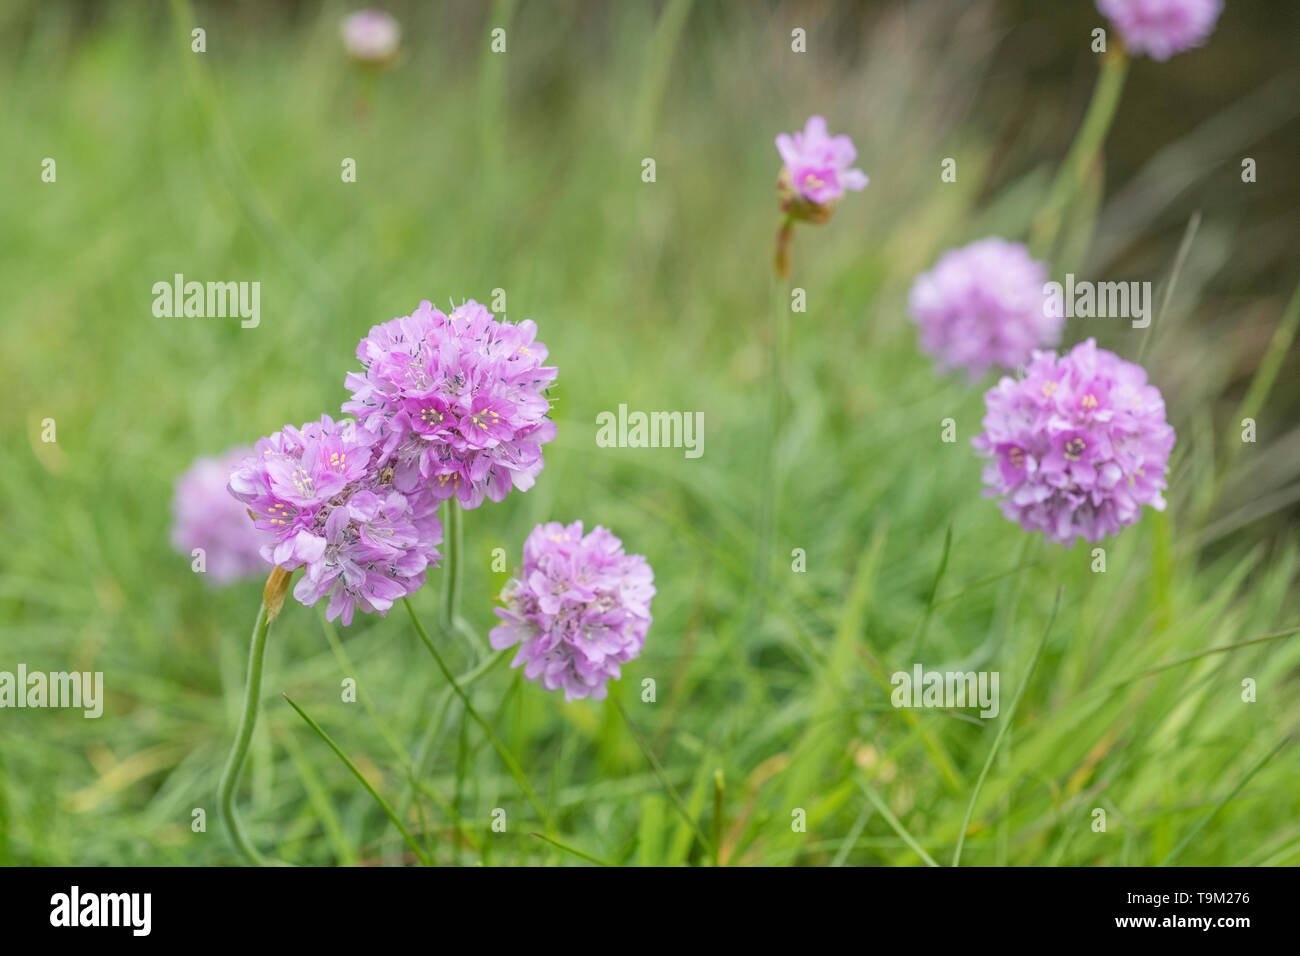 Macro close-up of pink flowers of Thrift / Sea Pink - Armeria maritima - a common seashore and coastal plant in the UK. Stock Photo